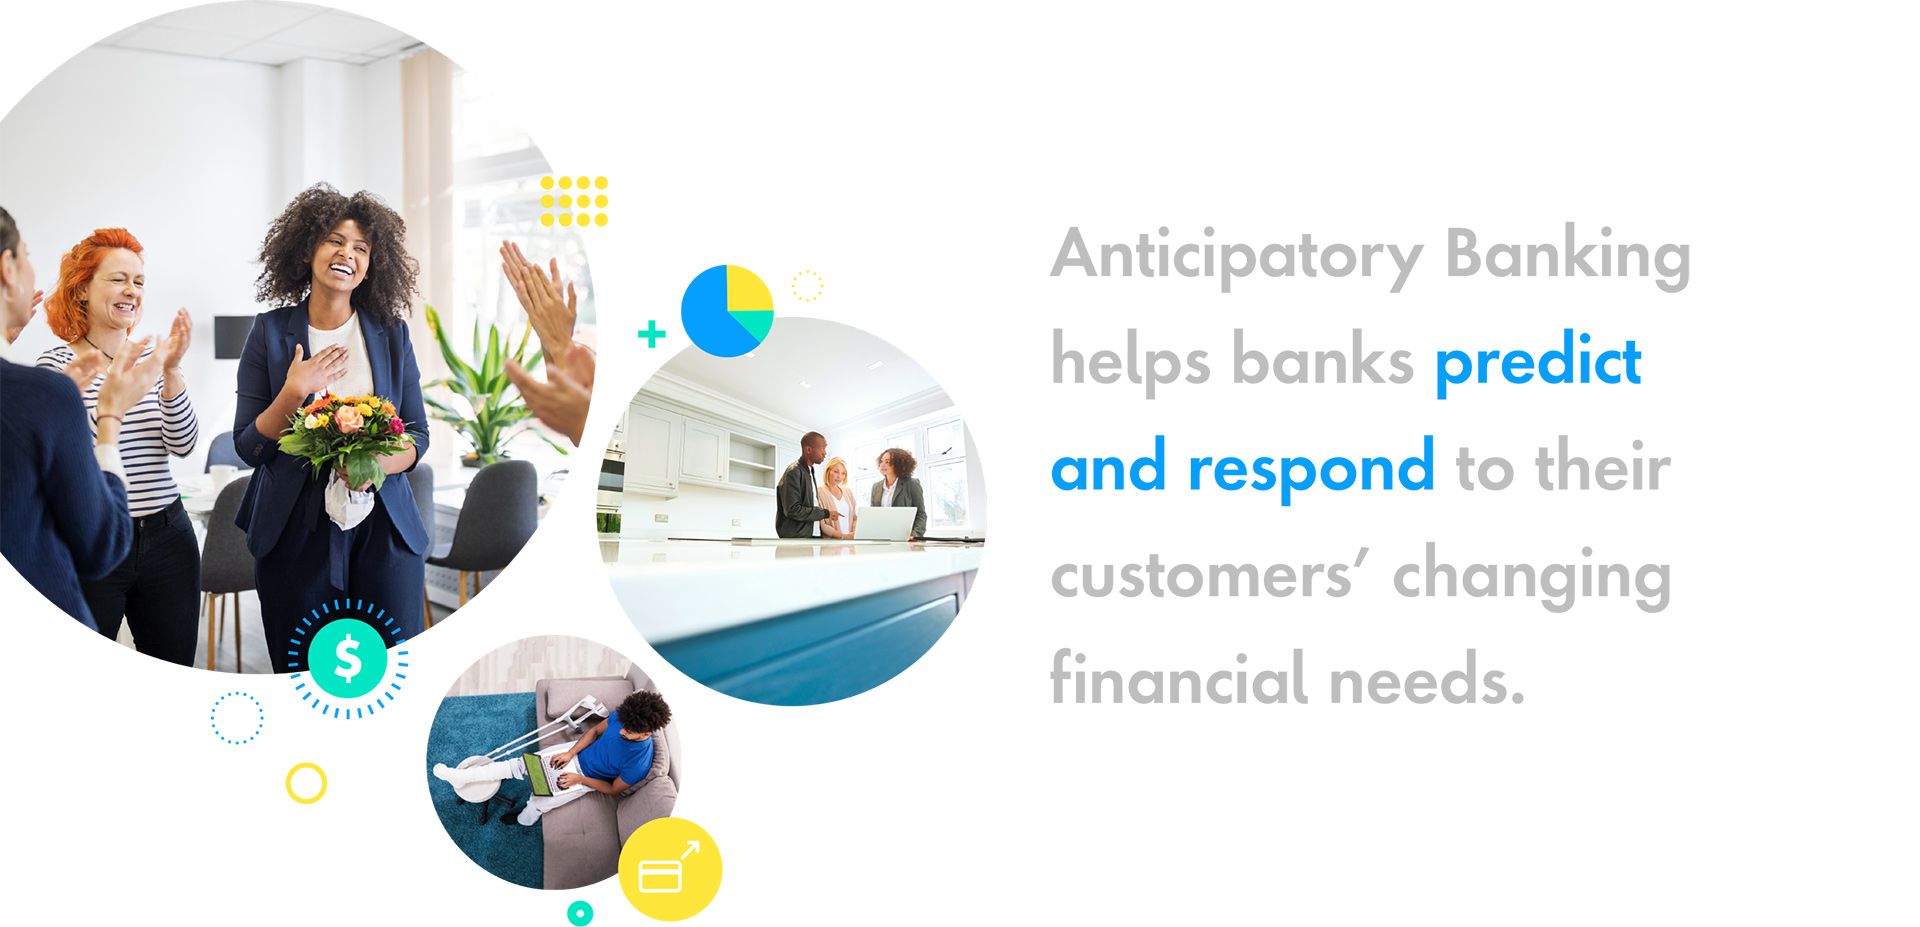 Anticipatory banking helps banks predict and respond to their customers' changing financial needs